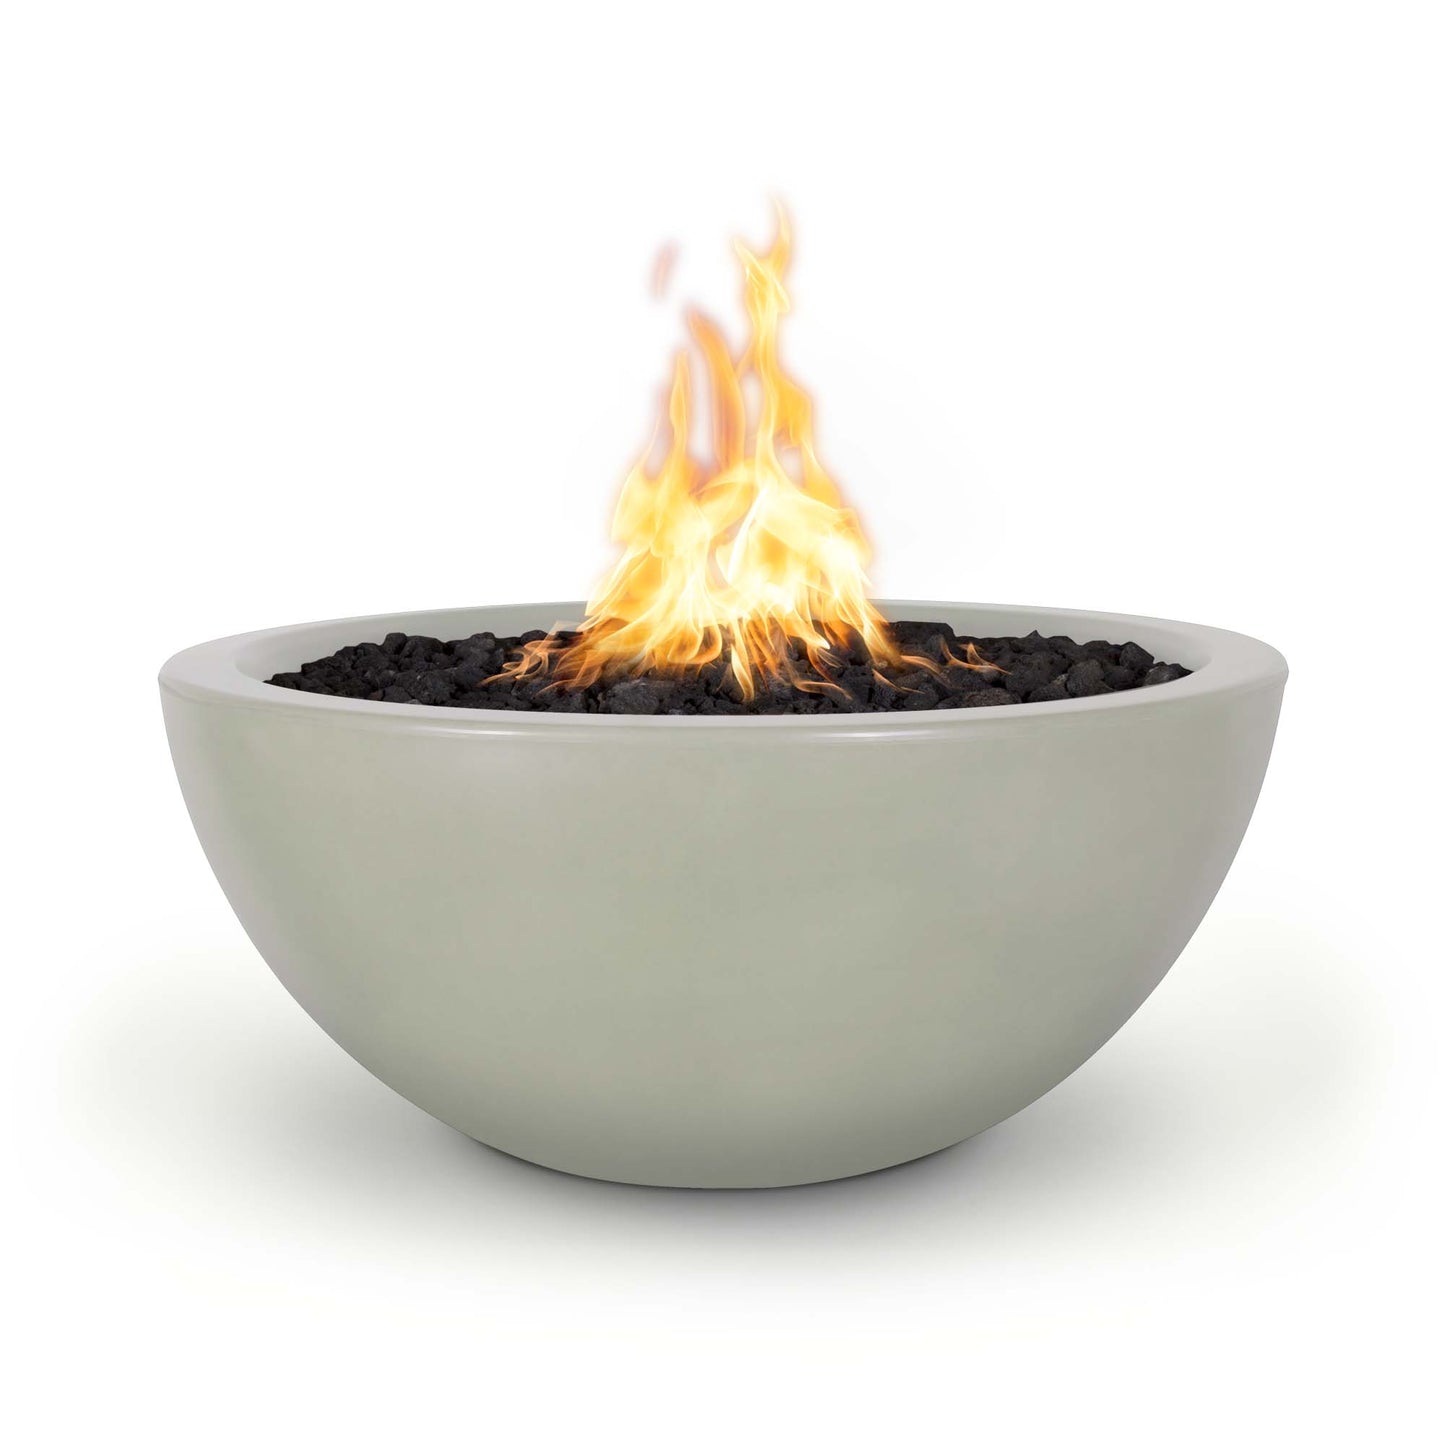 The Outdoor Plus Round Luna 30" Vanilla GFRC Concrete Natural Gas Fire Bowl with Match Lit with Flame Sense Ignition